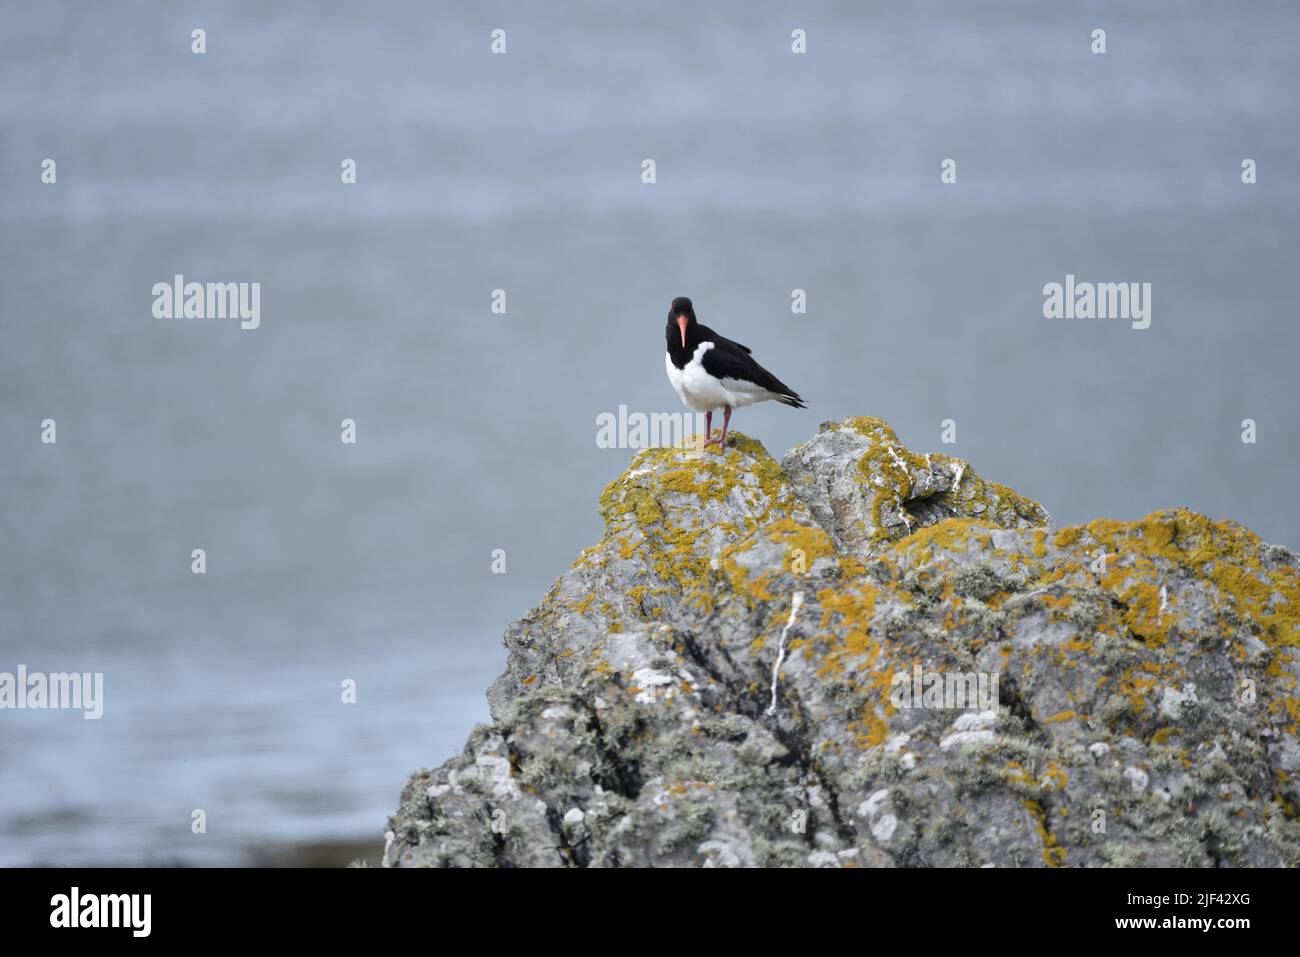 Eurasian Oystercatcher (Haematopus ostralegus) Standing On Top of a Lichen Covered Rock to Right of Image, Facing Camera with Blue Sea Background, UK Stock Photo